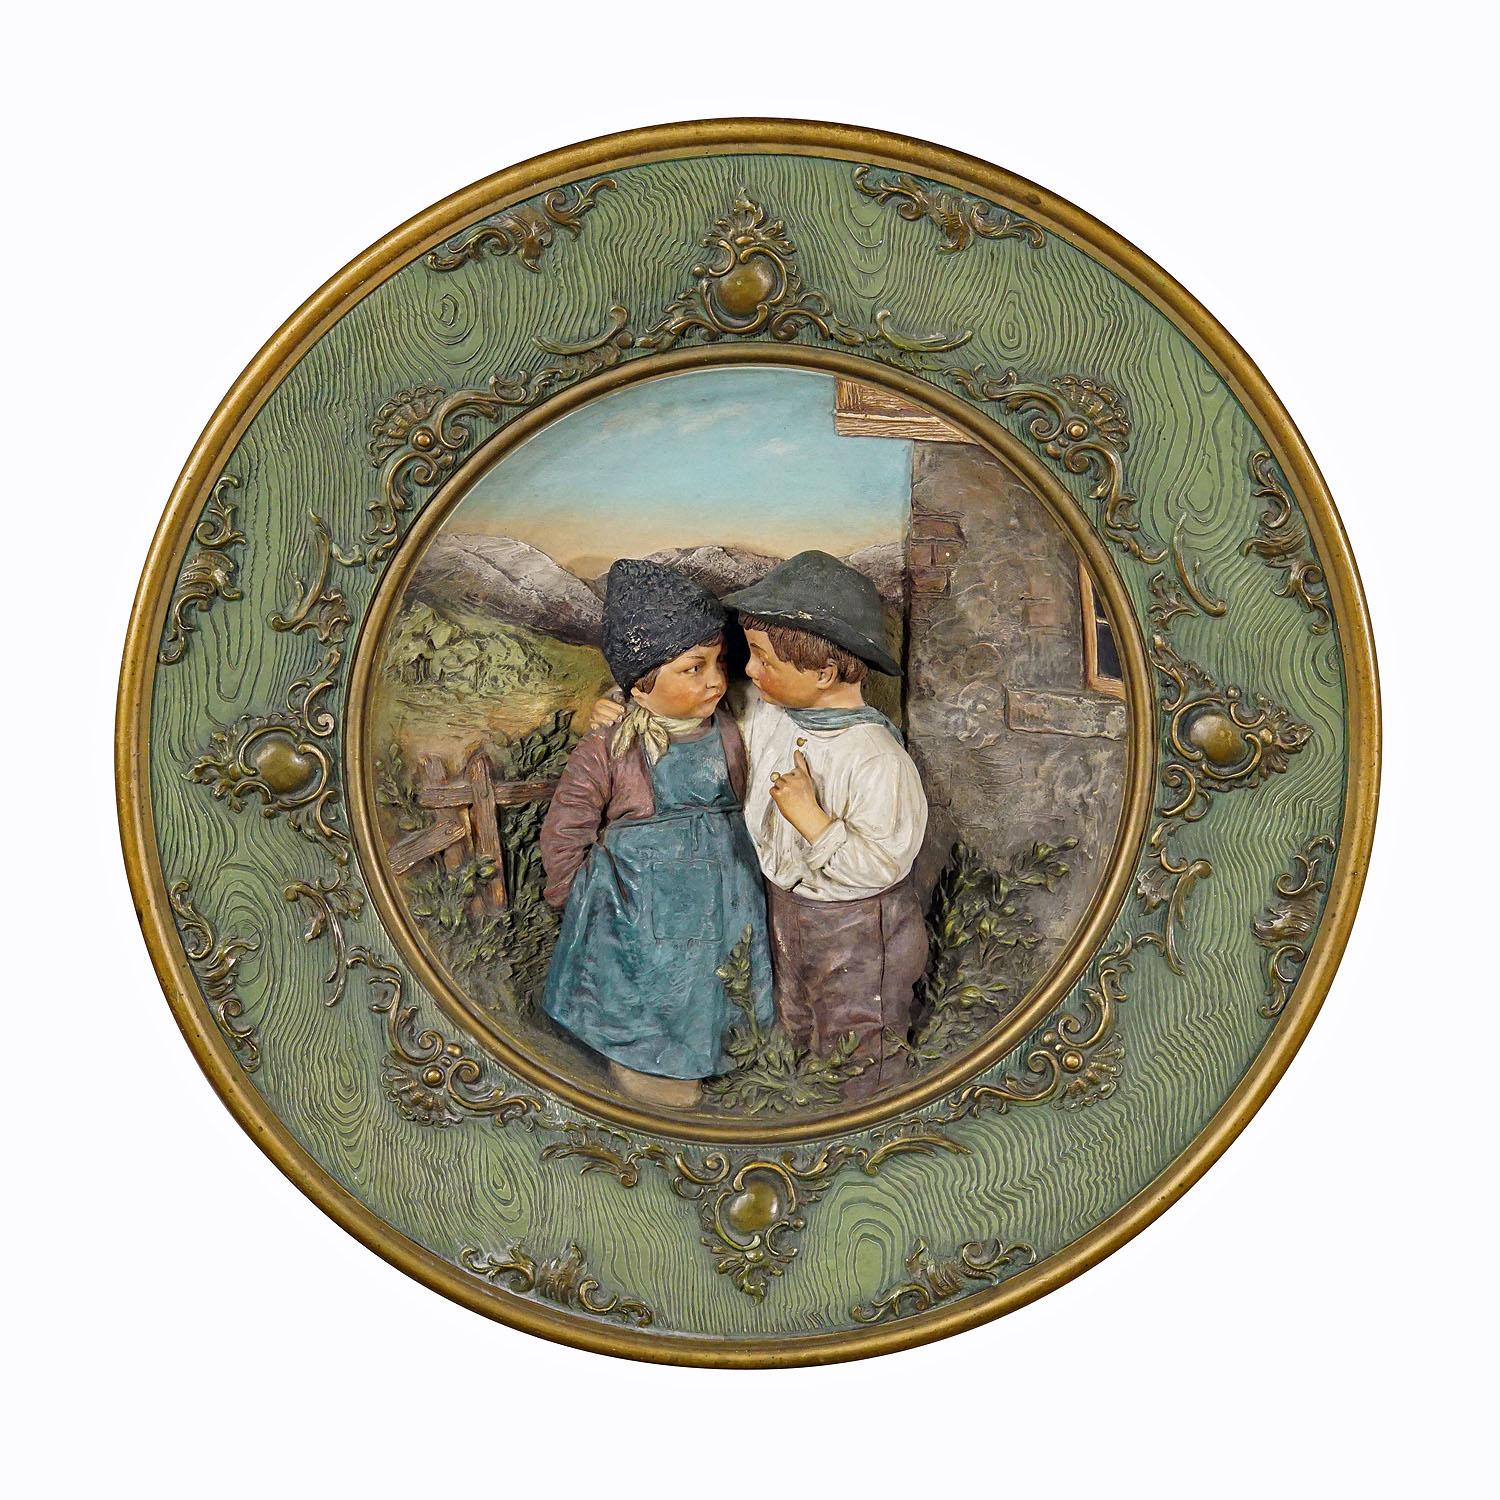 Terracotta Wall Plate with Lovely Children in Traditional Costumes by Johann Maresch

A large terracotta wall plate depicting a relief couple of farmers childs in a rural enviroment. Manufactured by Johann Maresch, Aussig Austria in the late 19th